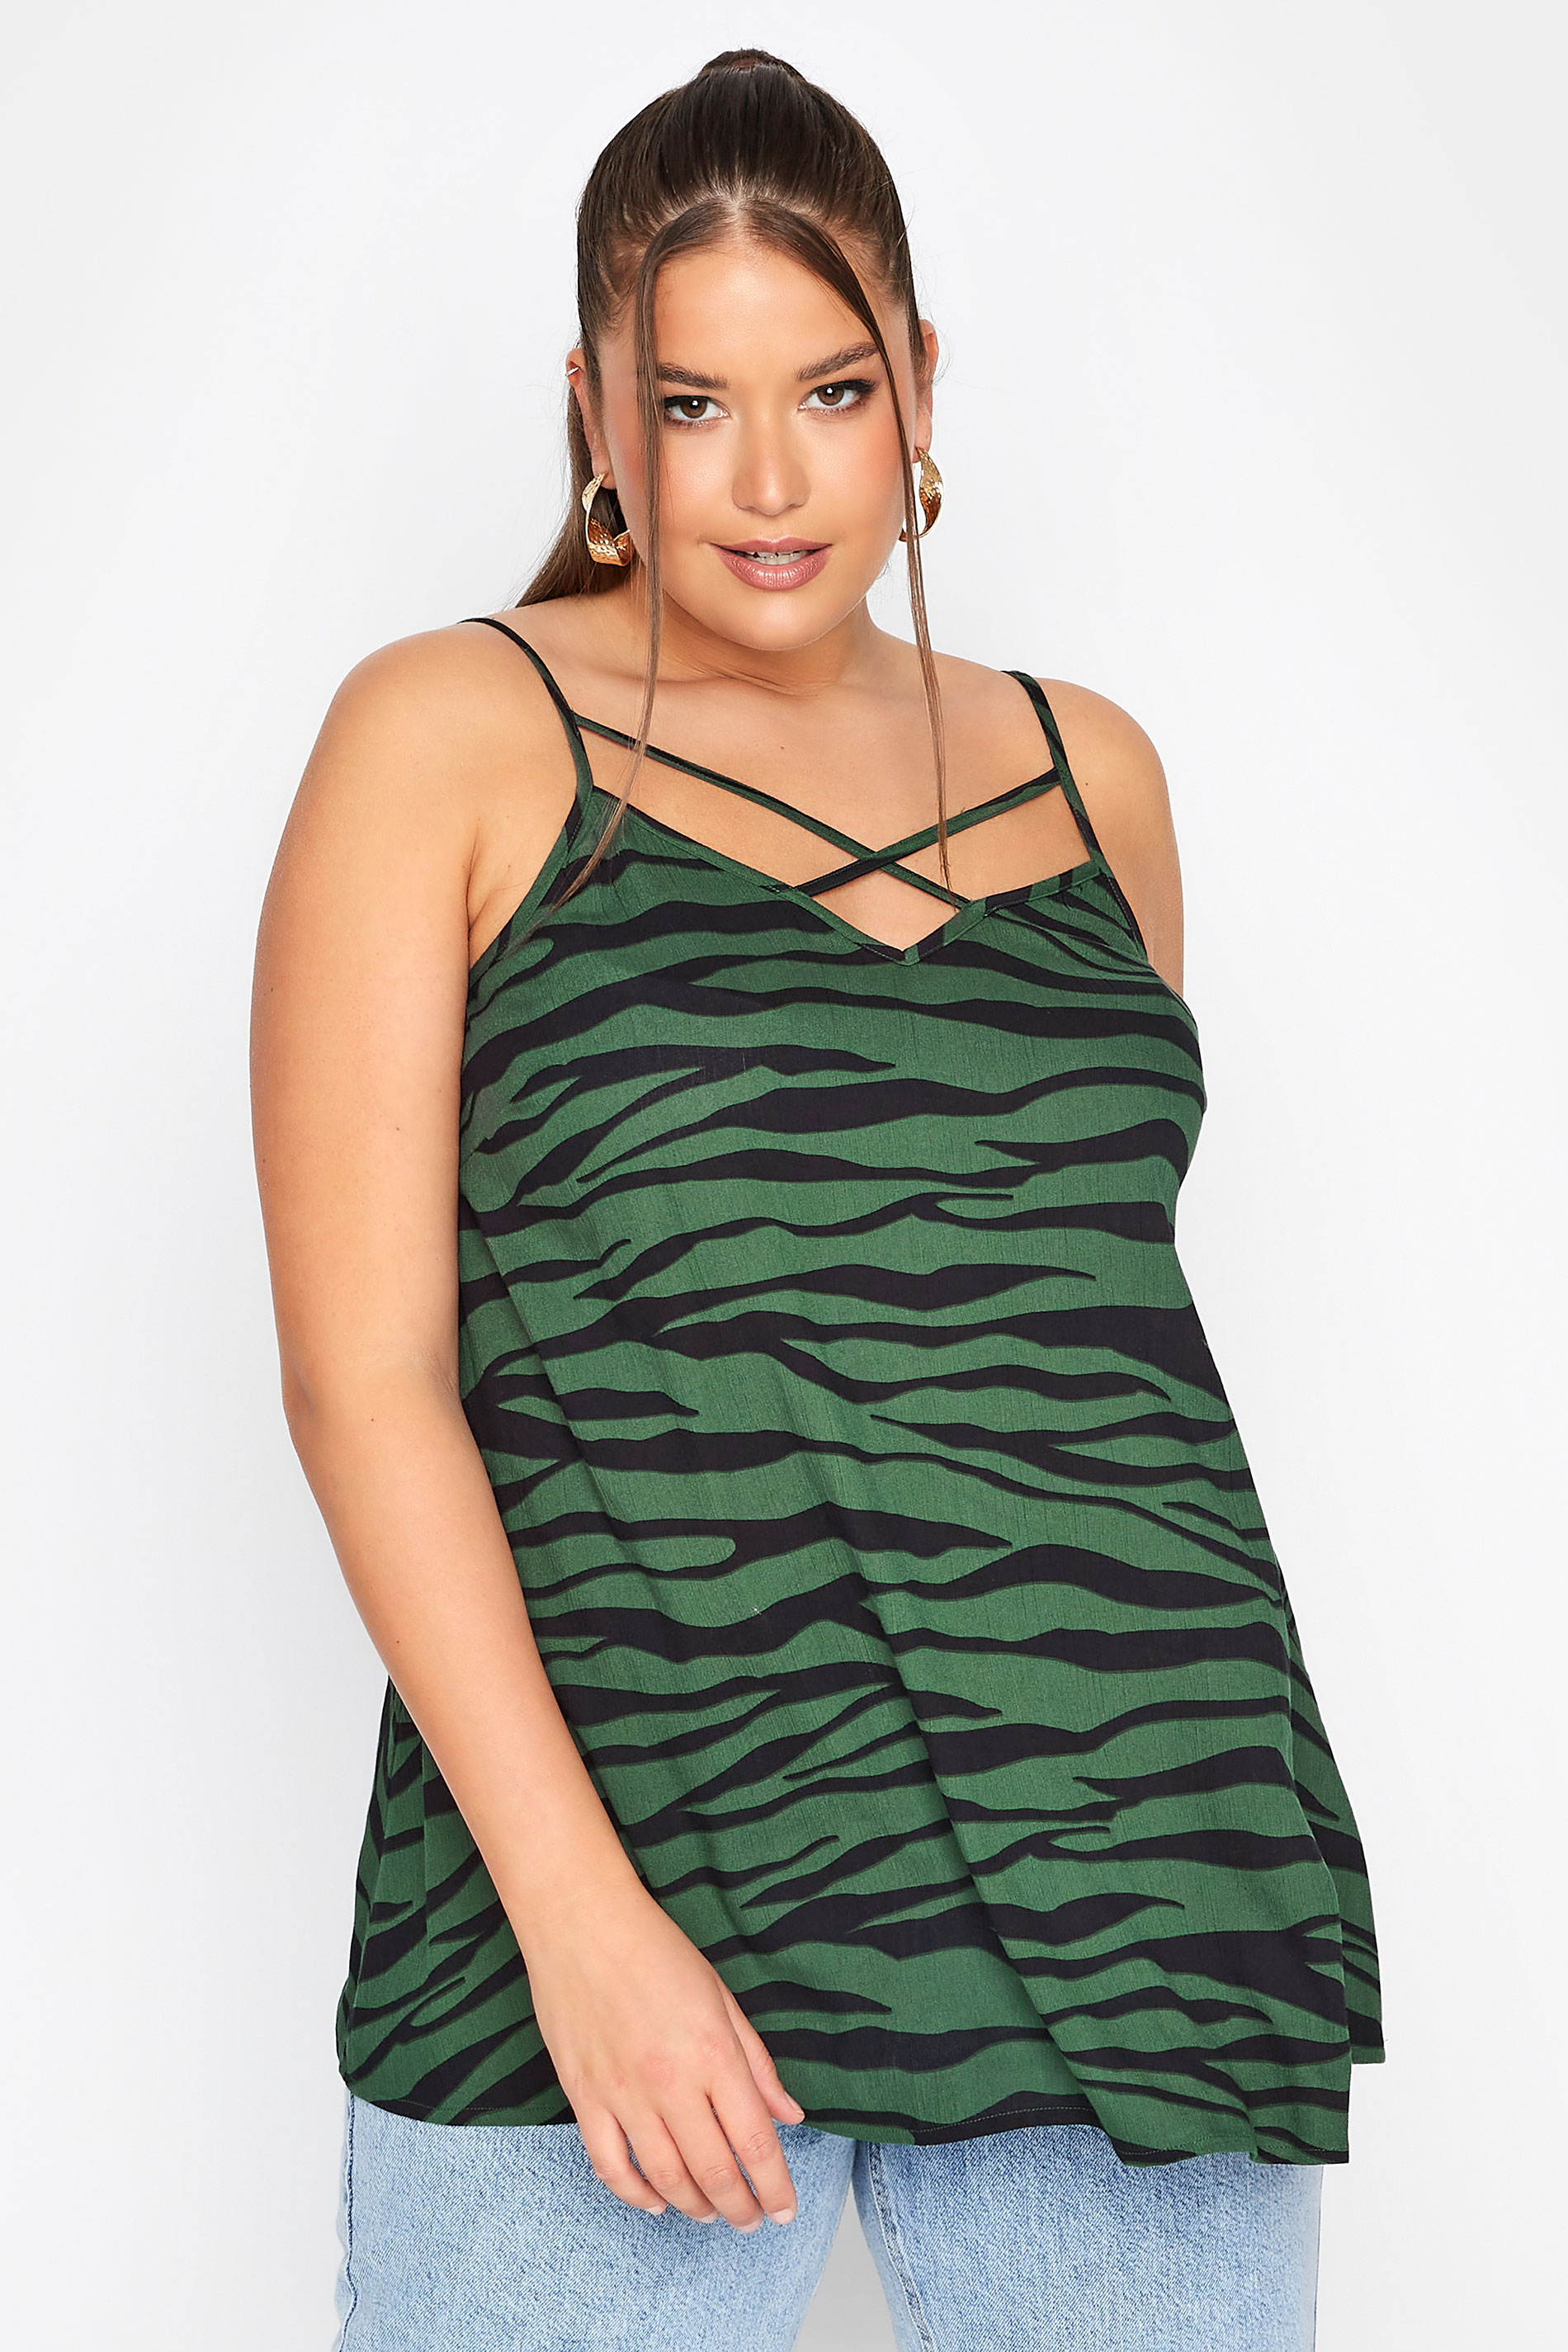 LIMITED COLLECTION Green Zebra Print Strappy Swing Cami Top_A.jpg